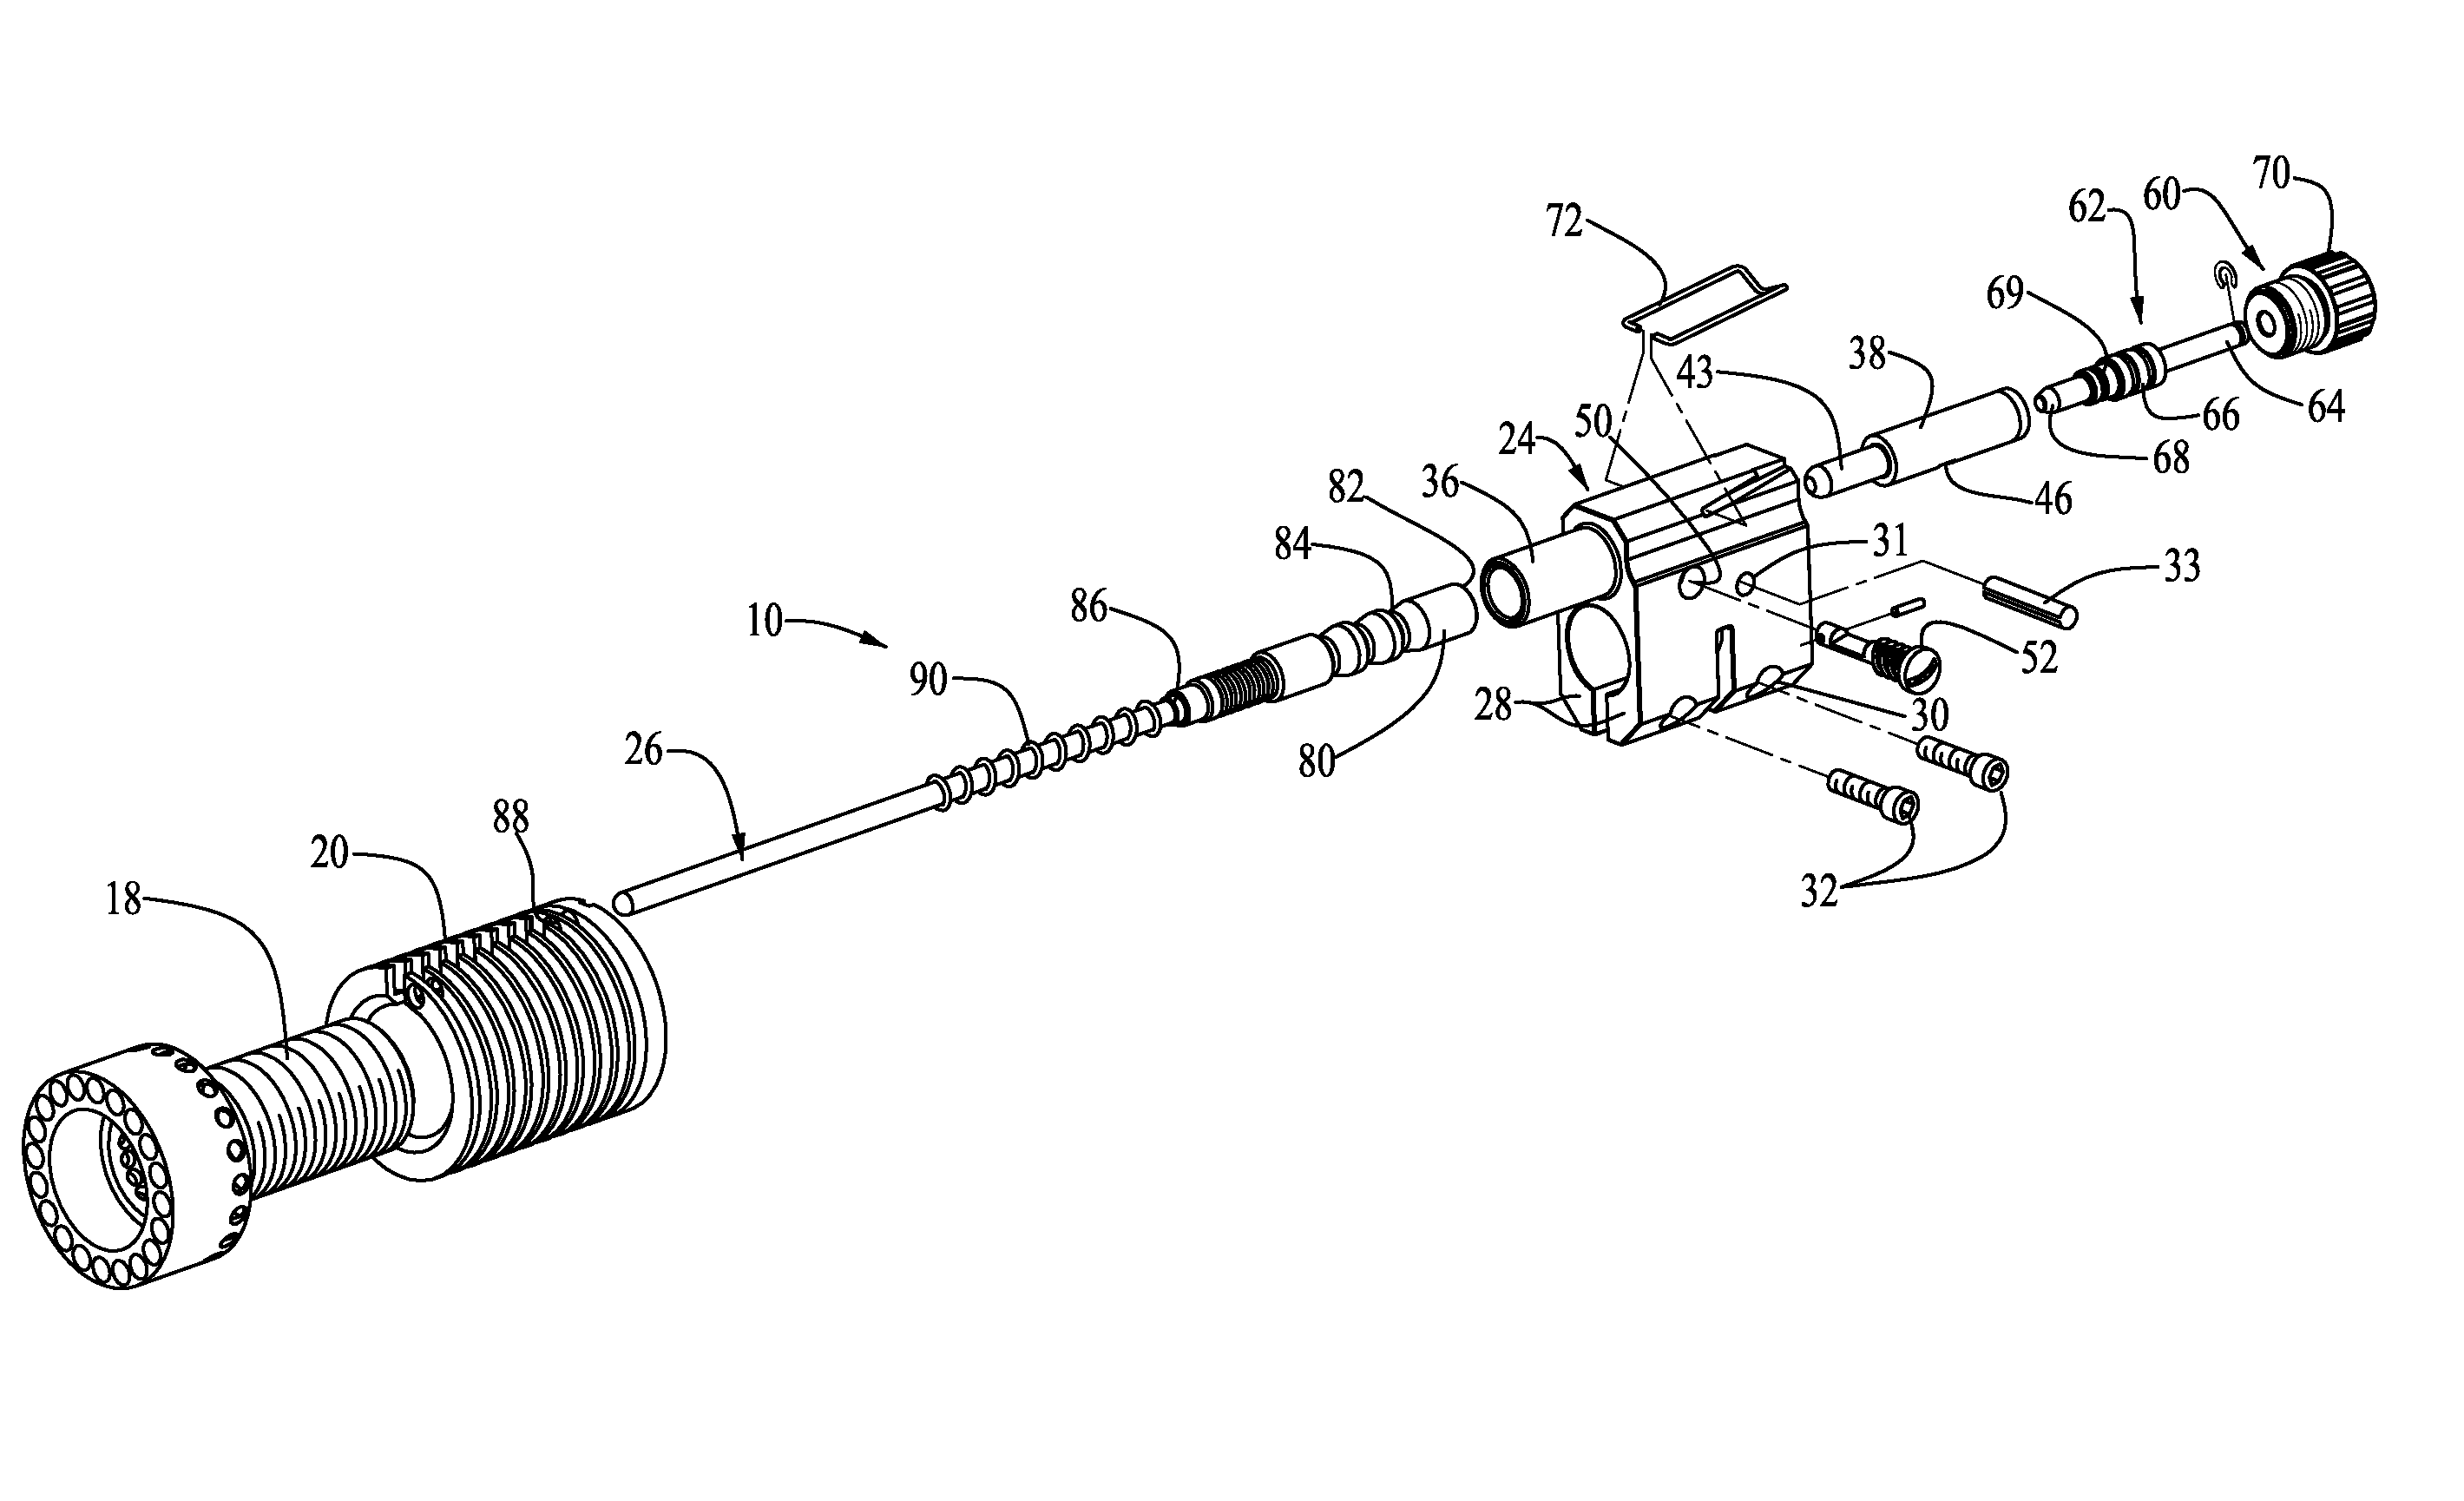 Gas piston control system for a firearm